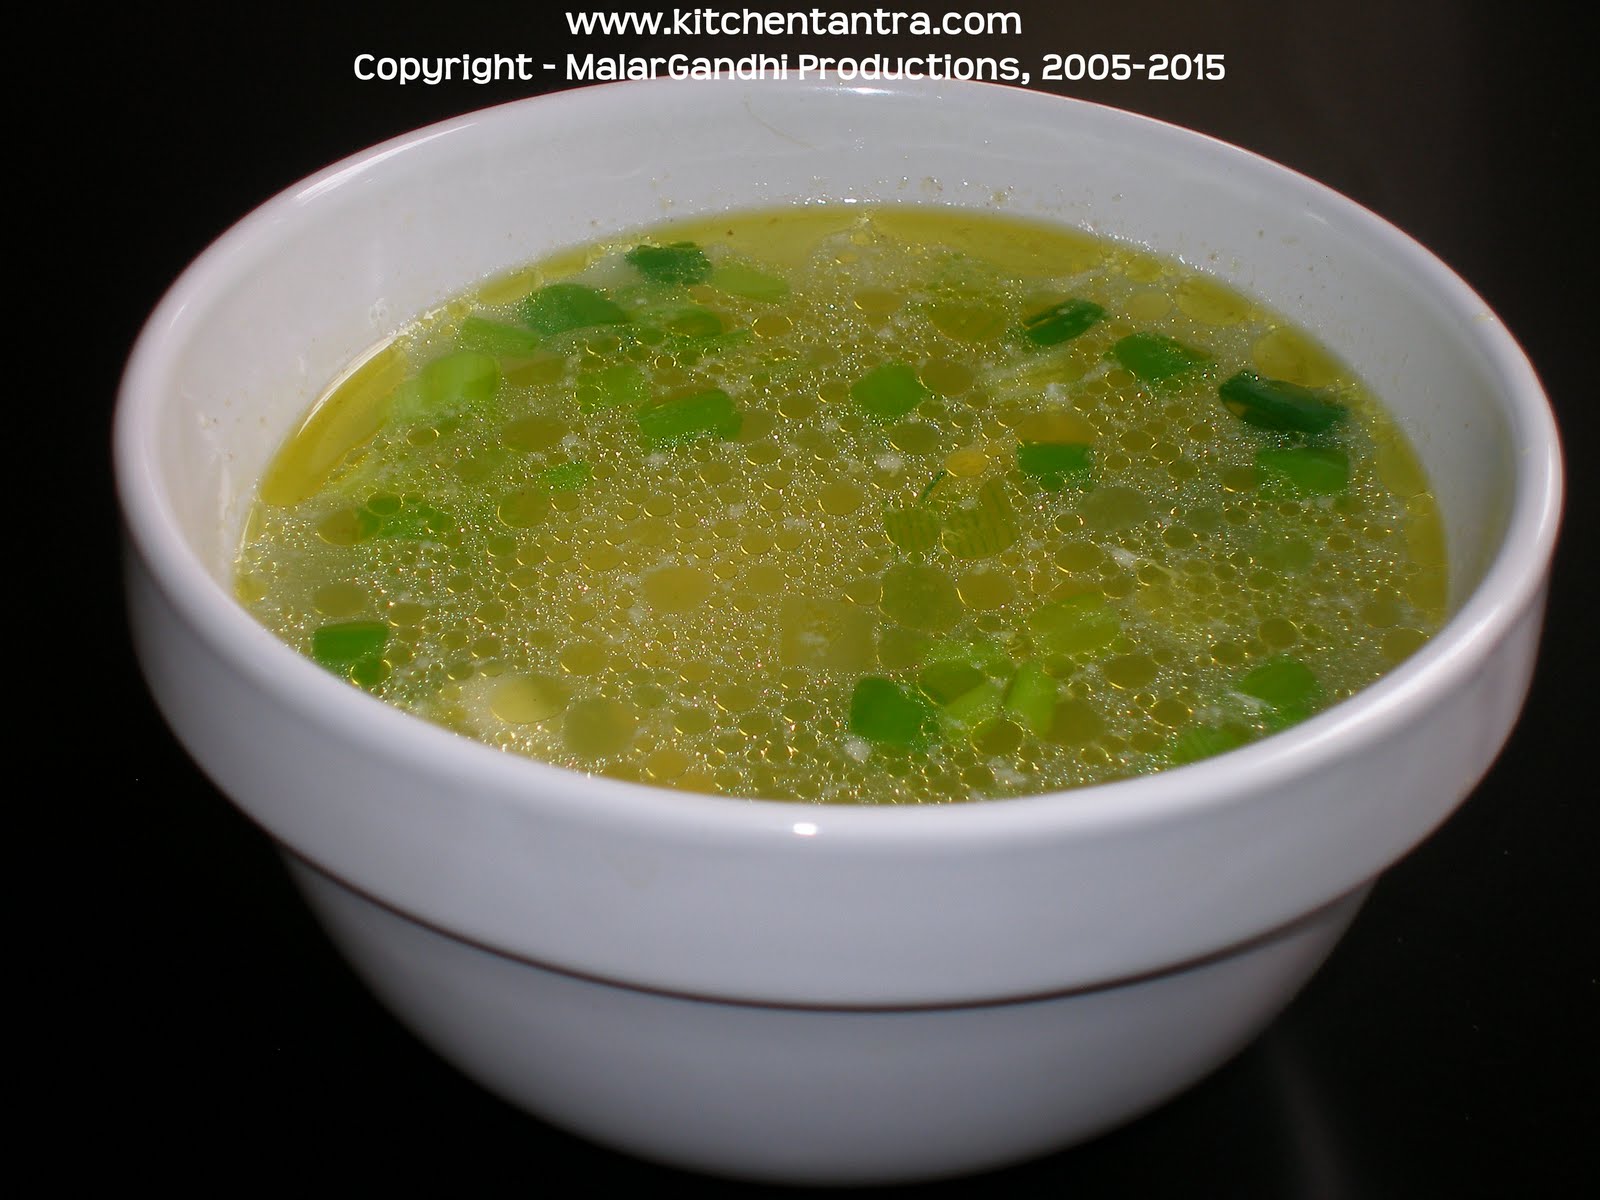 chinese egg soup